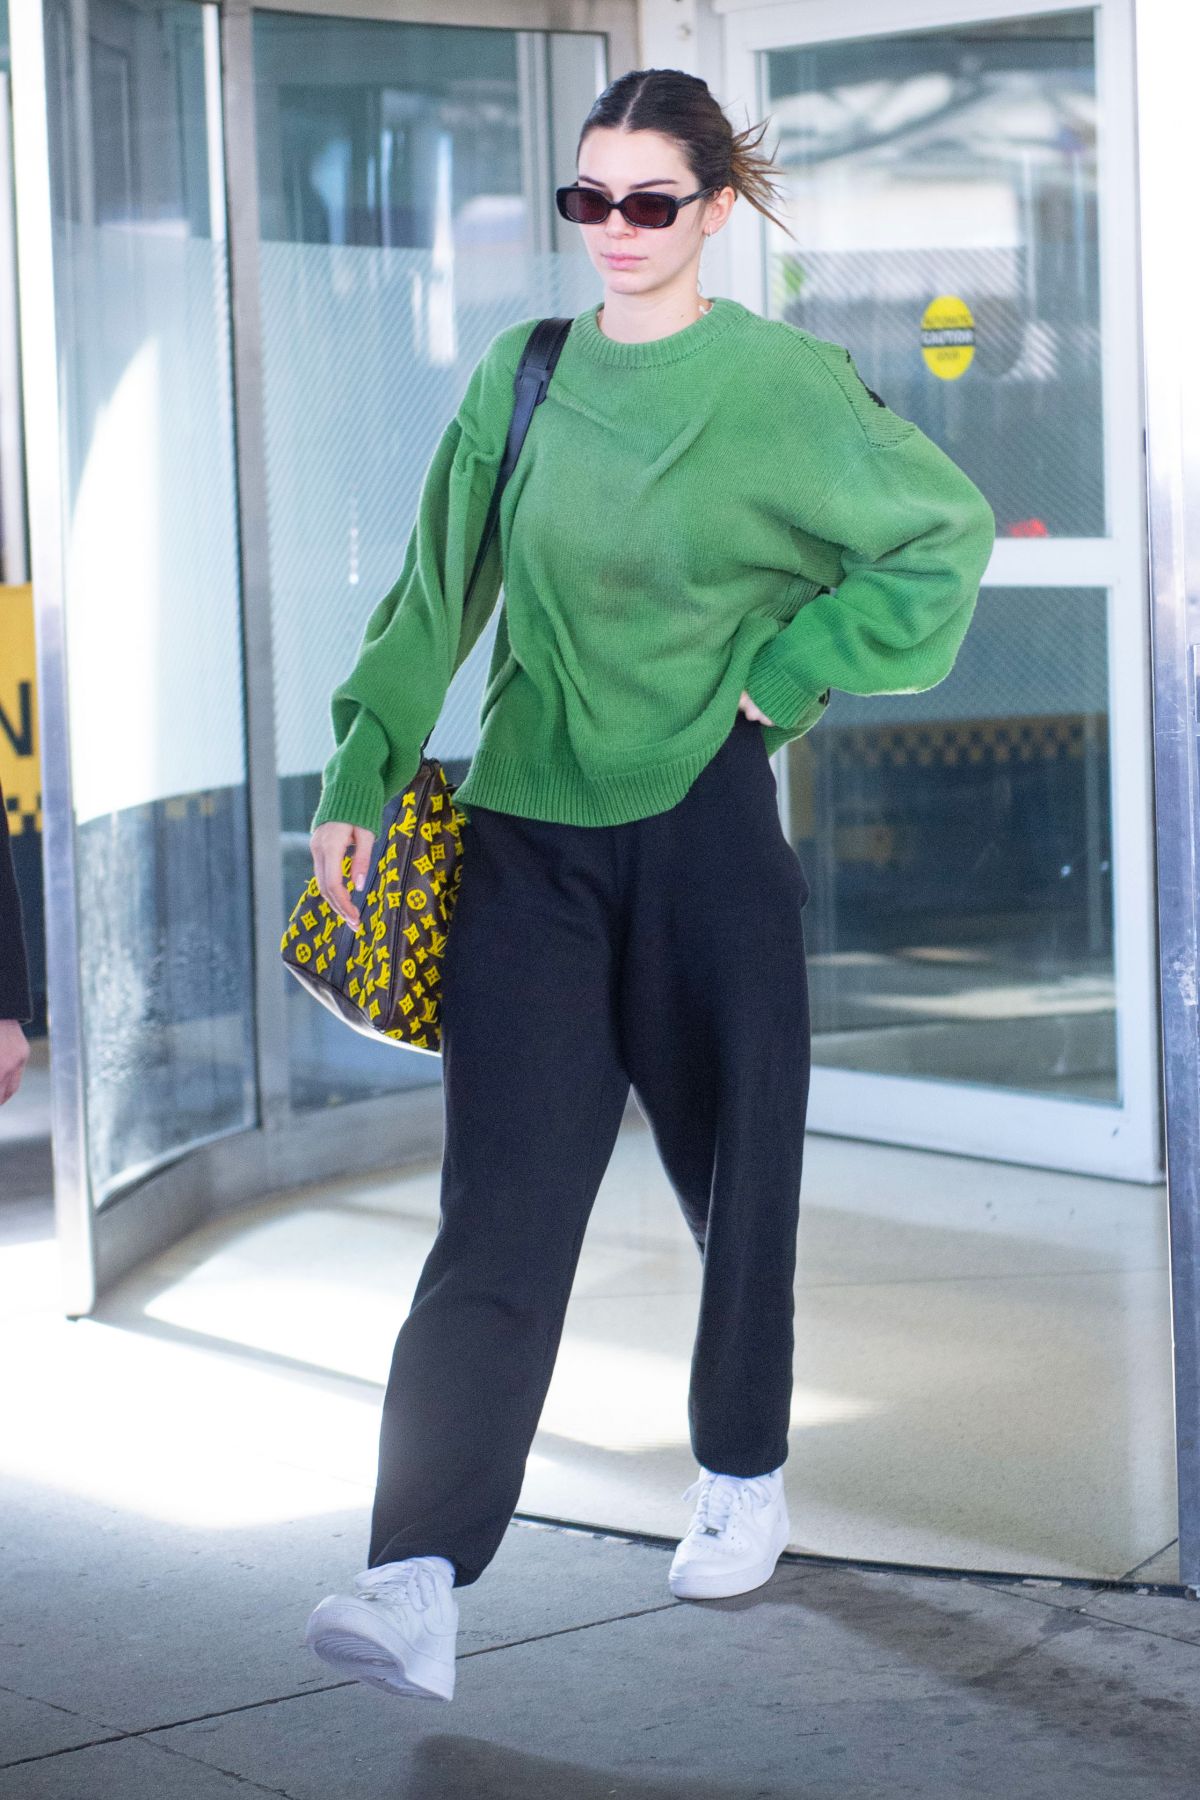 KENDALL JENNER at JFK Airport in New York 02/23/2020 – HawtCelebs